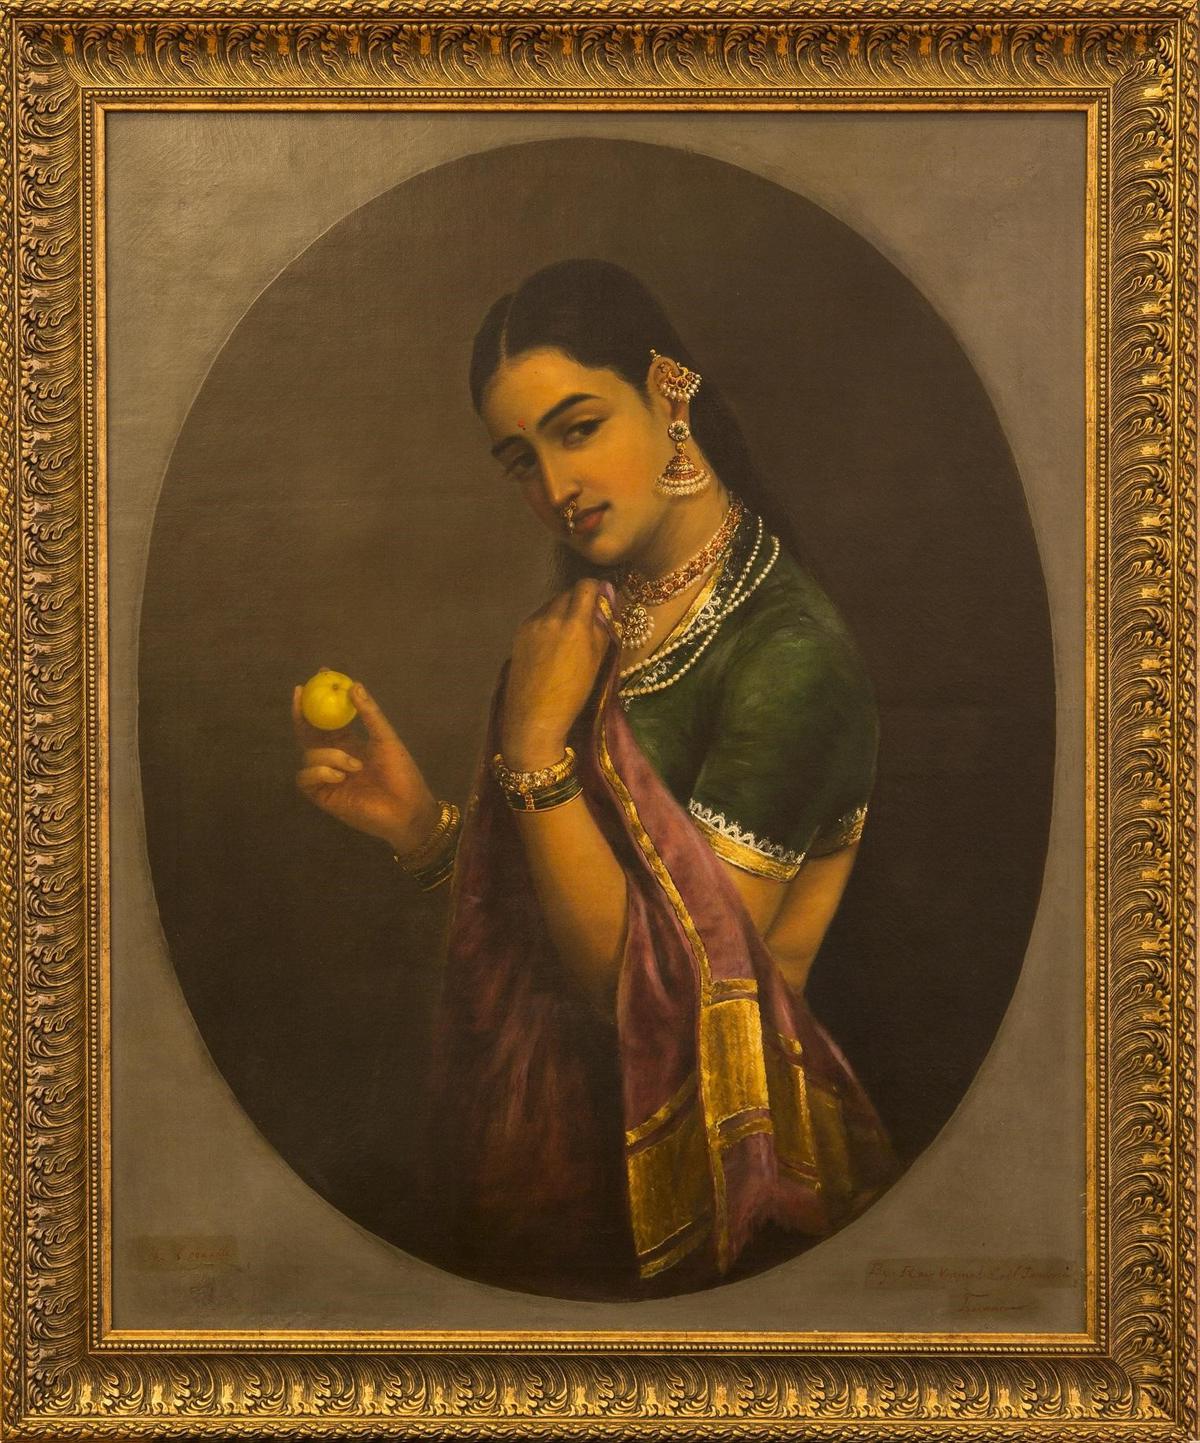 NFT versions of Raja Ravi Varma's paintings to be auctioned online ...